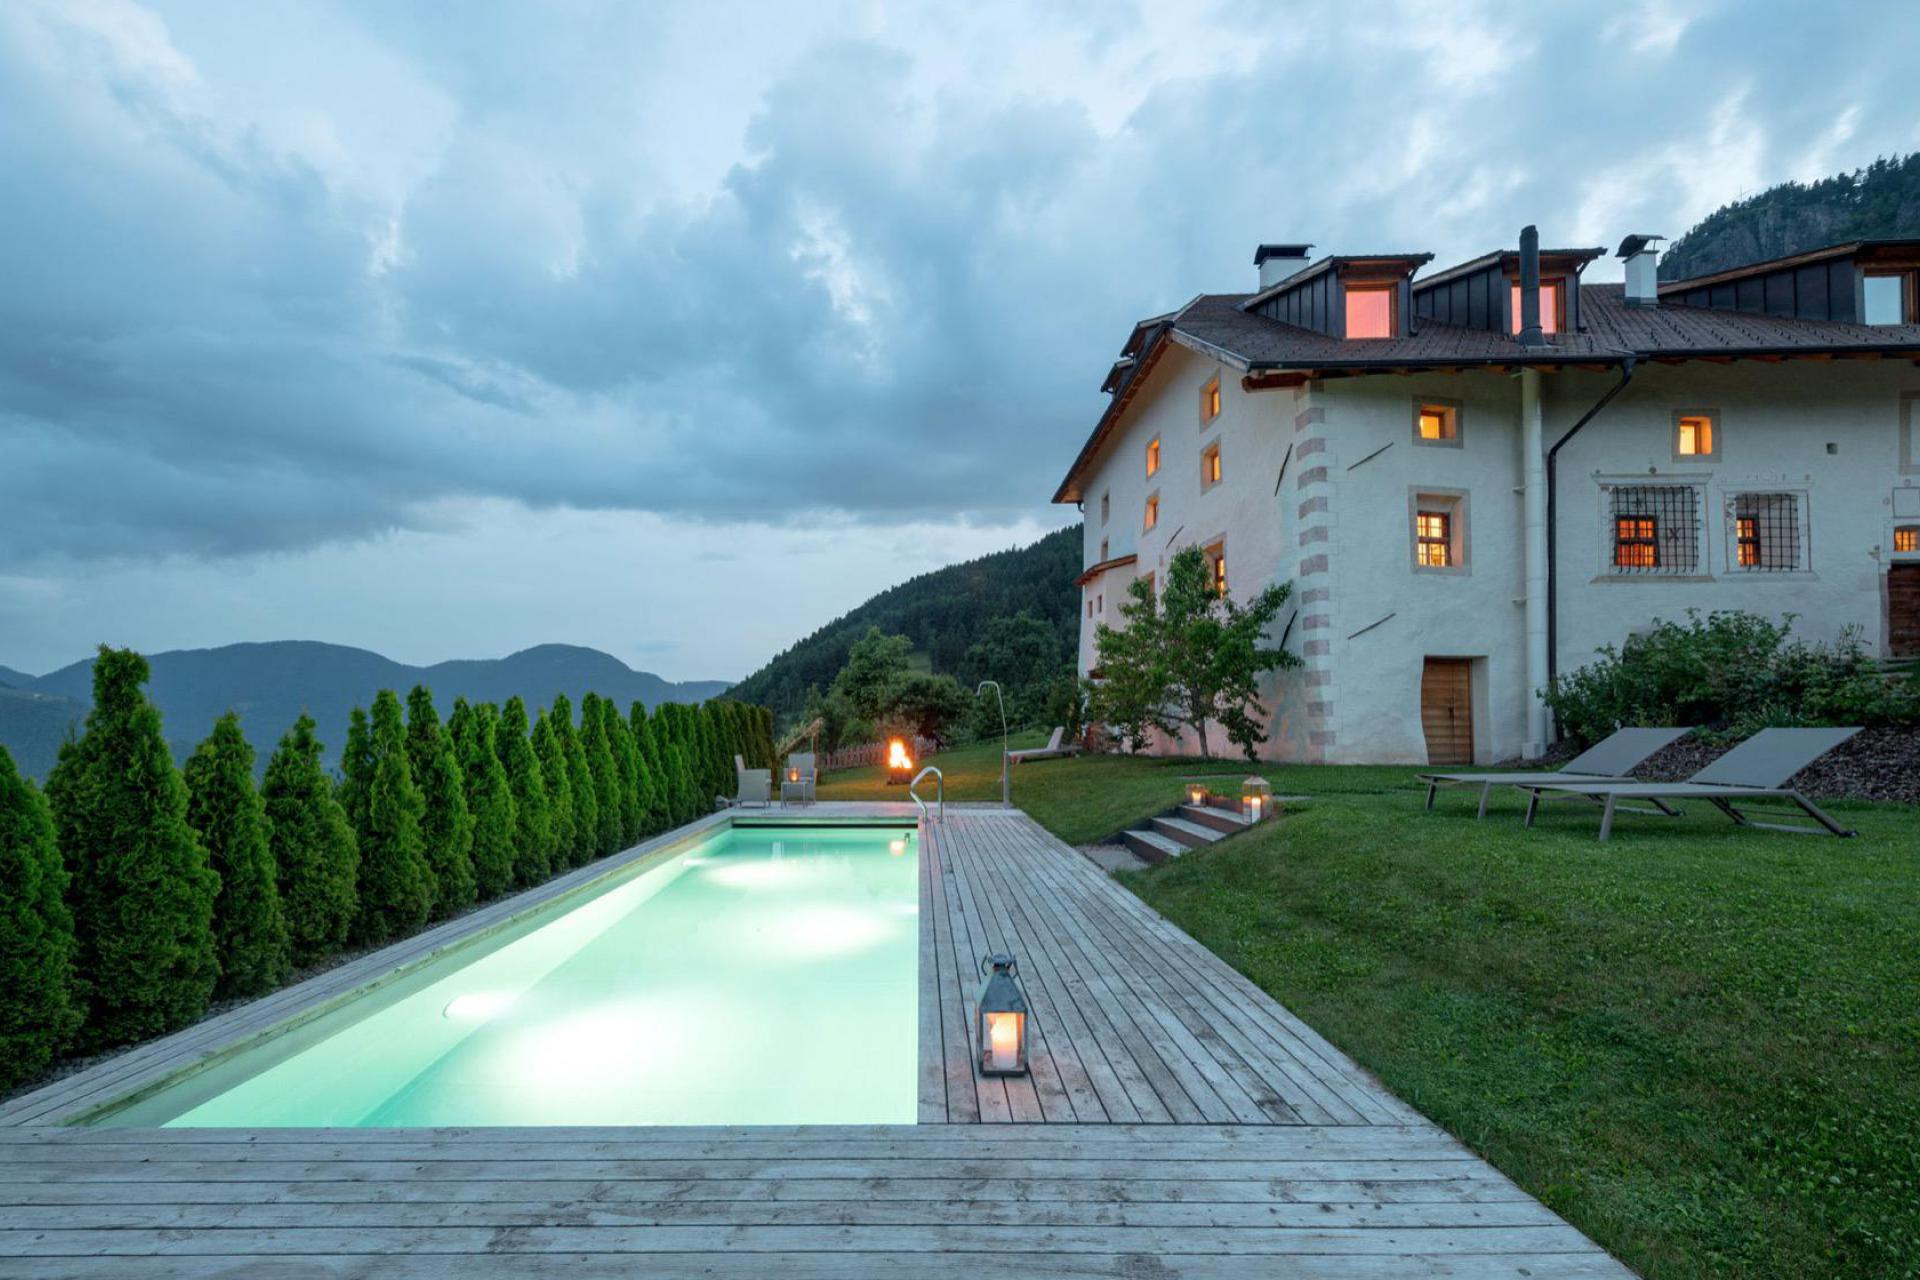 Luxury agriturismo with B&B rooms and Sudtiroler hospitality